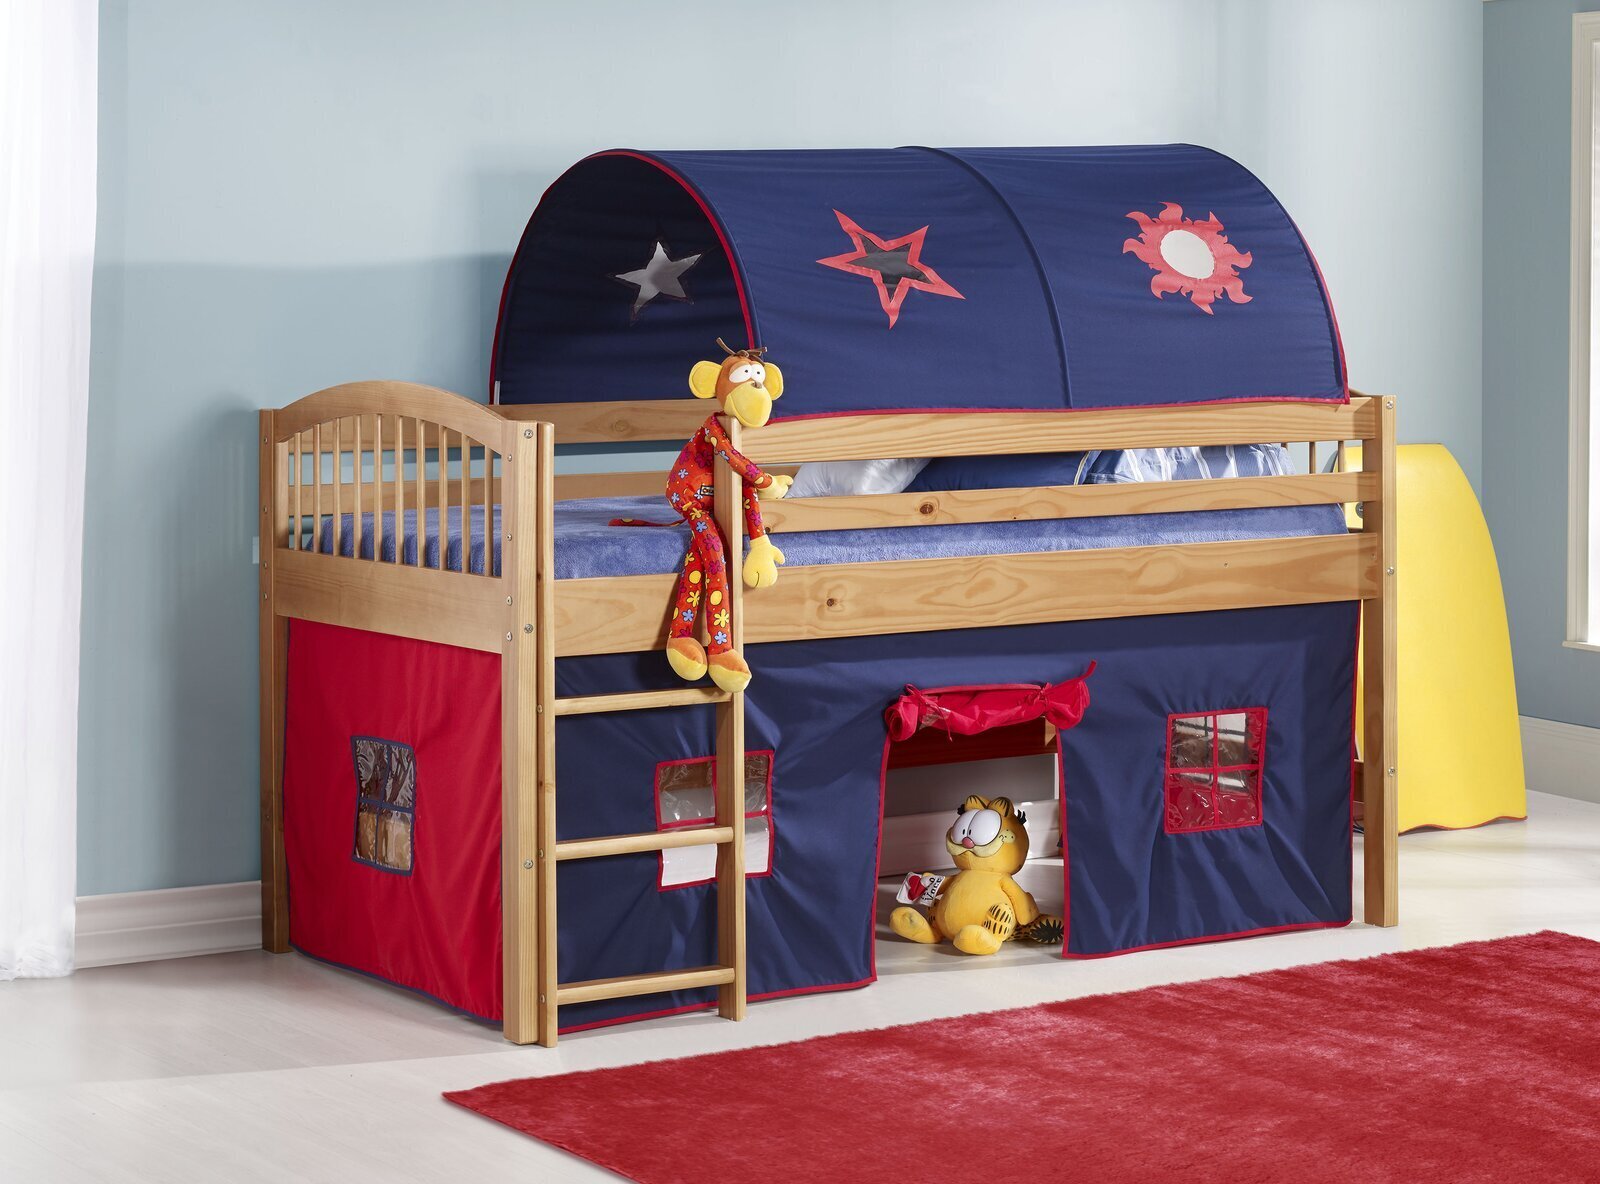 Playhouse Bed